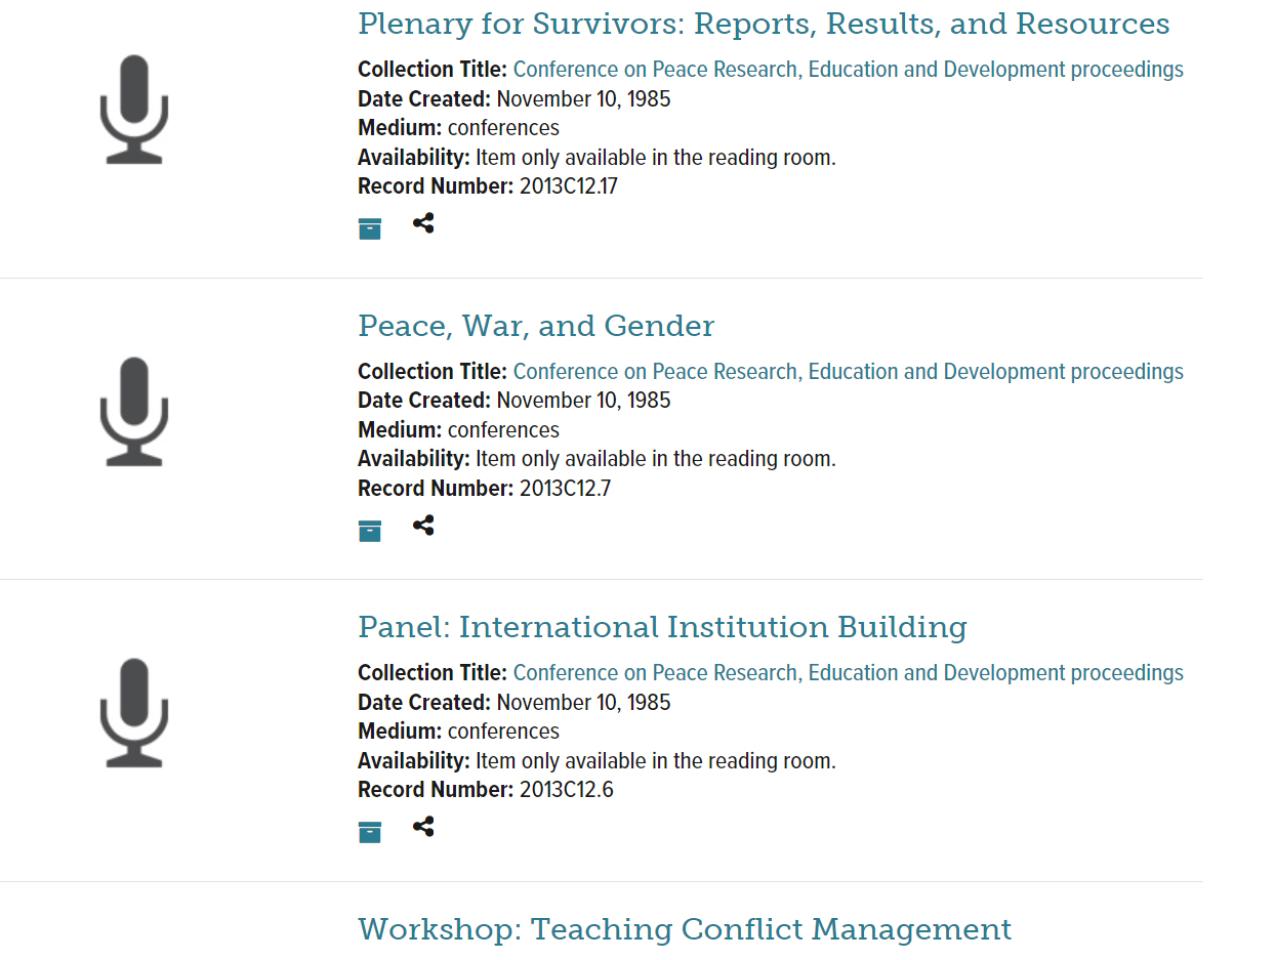 Conference on Peace Research, Education and Development proceedings